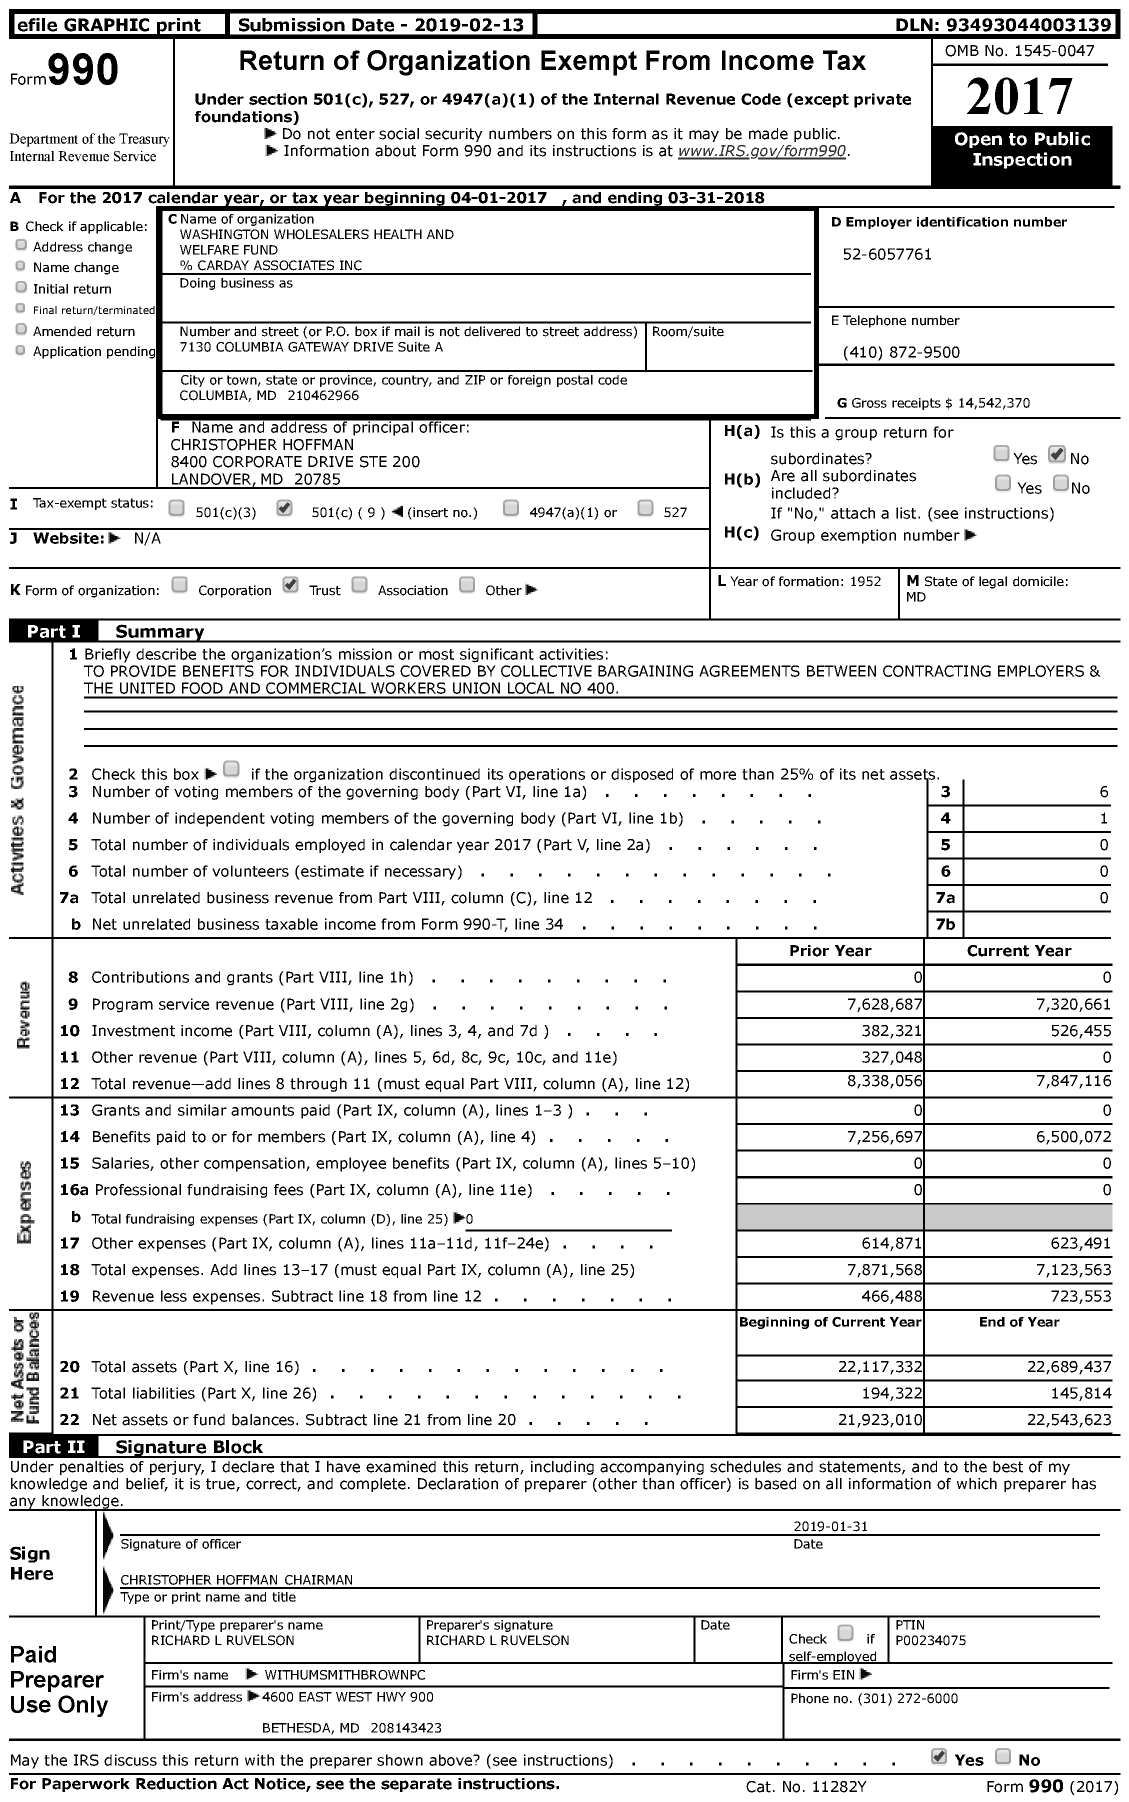 Image of first page of 2017 Form 990 for Washington Wholesalers Health and Welfare Fund